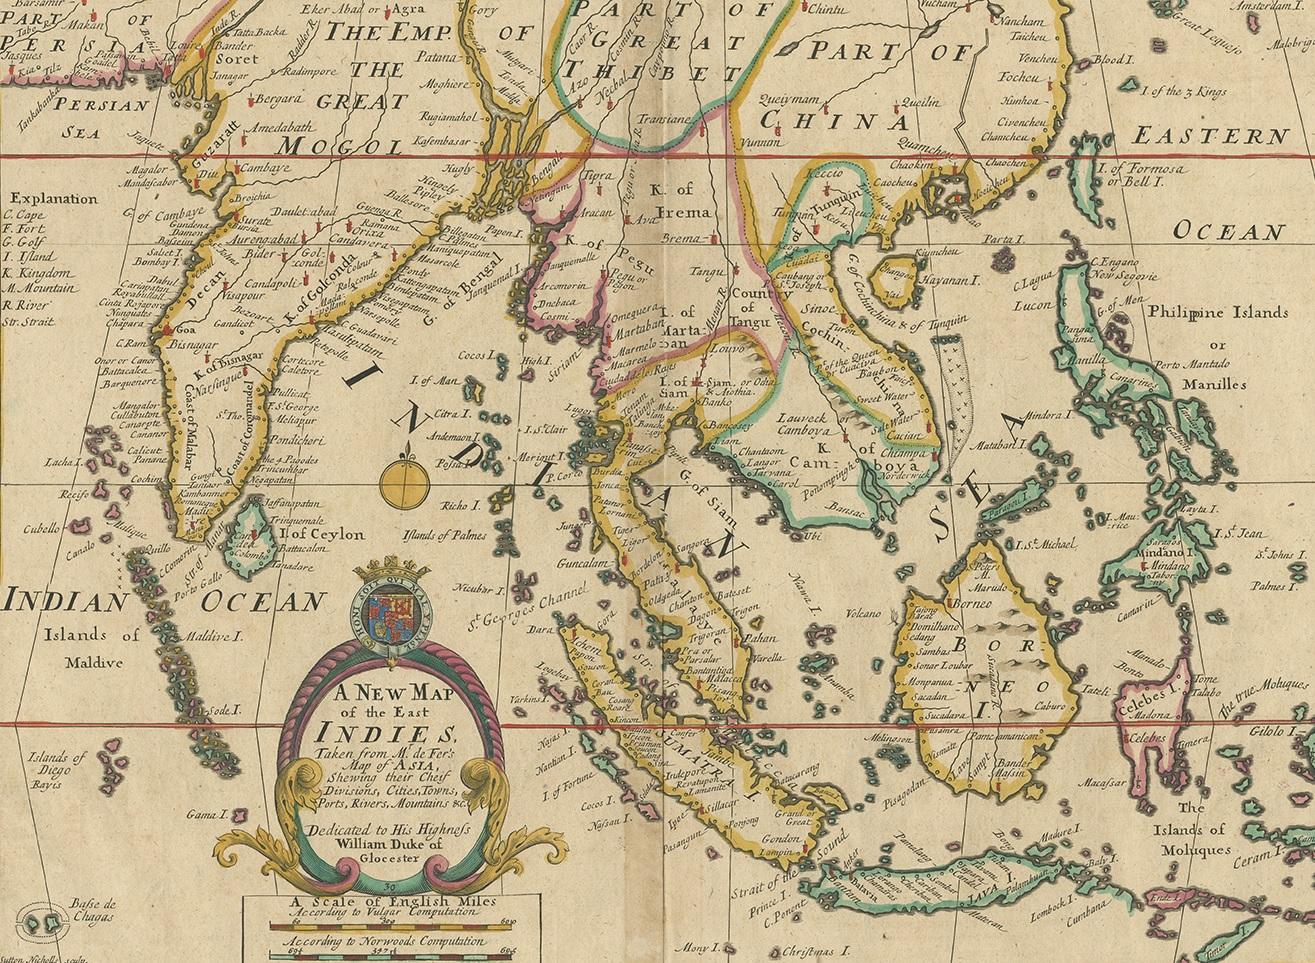 Antique map titled 'A New Map of the East Indies'. Old map covering all of Southeast Asia from Persia to the Timor Island, inclusive of the modern day nations of India, Ceylon, Thailand, Burma (Myanmar), Malaysia, Cambodia, Vietnam, Laos, Indonesia,